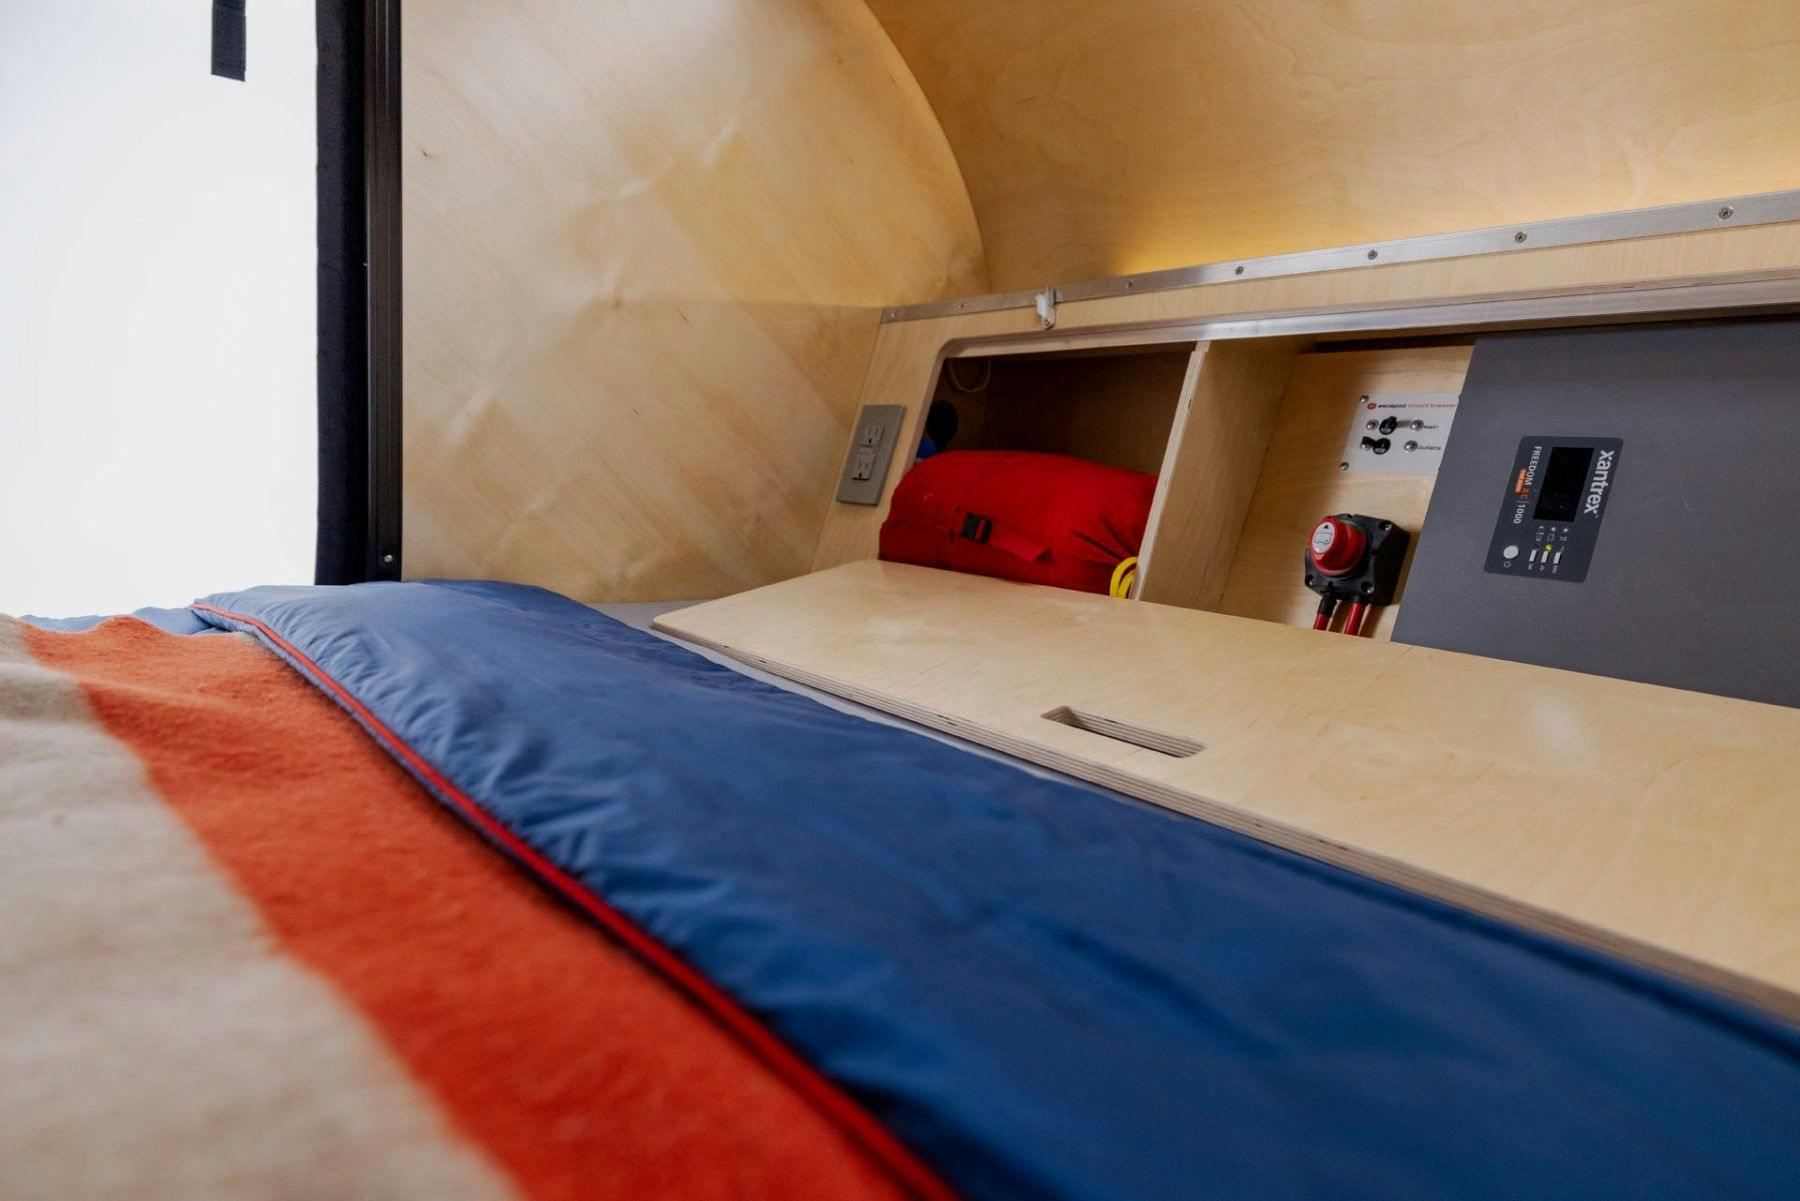 Birch Interior of a teardrop camper, with an angled headboard opened to show a Xantrex Inverter.